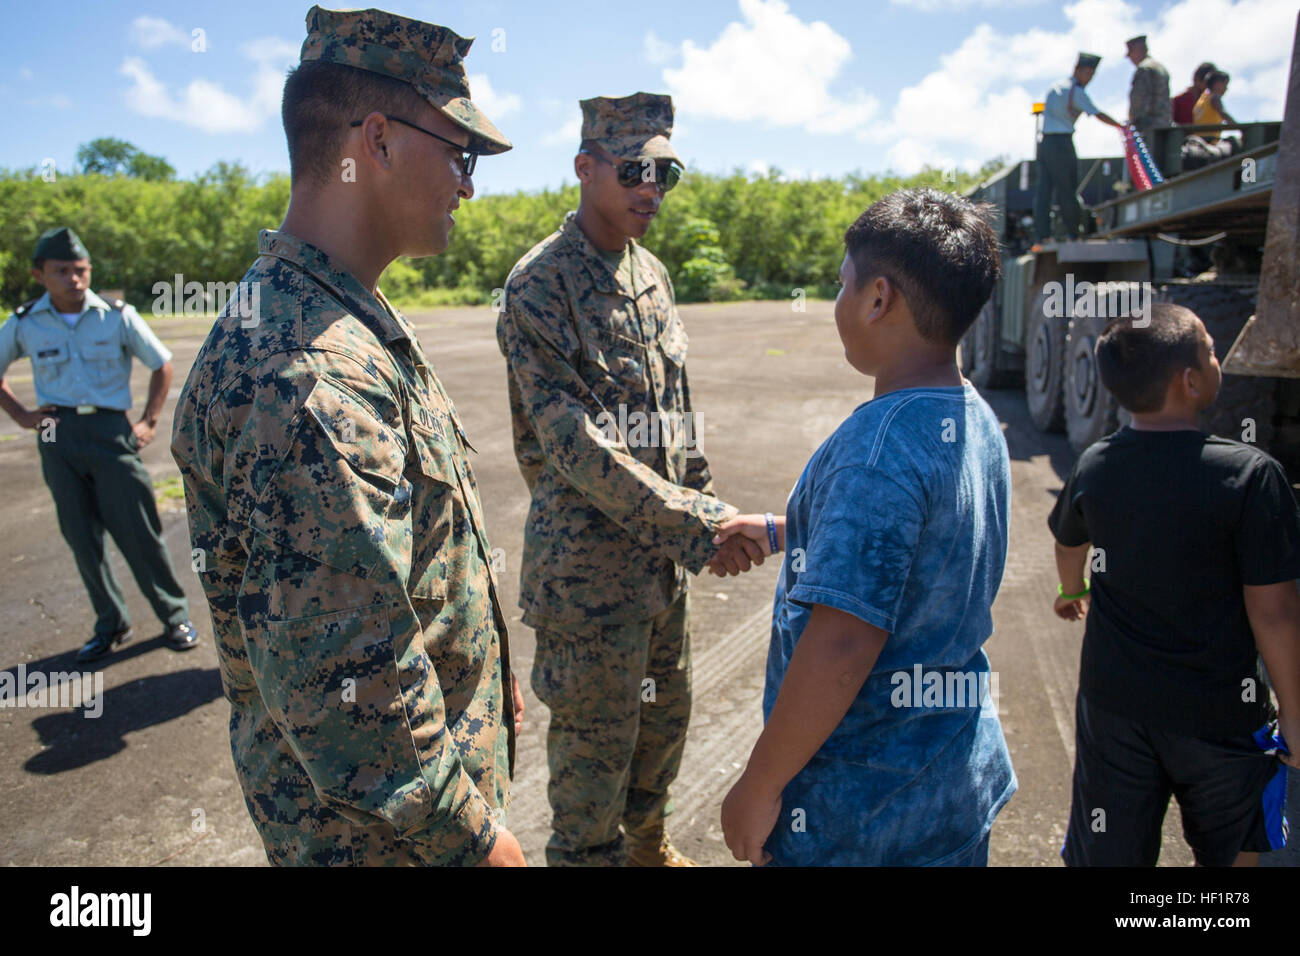 Lance Cpl. Raynaldo Olvera, from Dallas, TX., and Lance Cpl. Javan William, from the Virgin Islands, are thanked for their service by local Tinian children Nov. 11 after a Veterans Day and Marine Corps birthday ceremony at Tinian's Historic North Field during exercise Forager Fury II. Olvera and William showed the children the heavy equipment they operate and how exactly they will restore the air field. Olvera is a heavy equipment mechanic and William is a heavy equipment operator with Marine Wing Support Squadron 171, Marine Aircraft Group 12, 1st Marine Aircraft Wing, III Marine Expeditionar Stock Photo